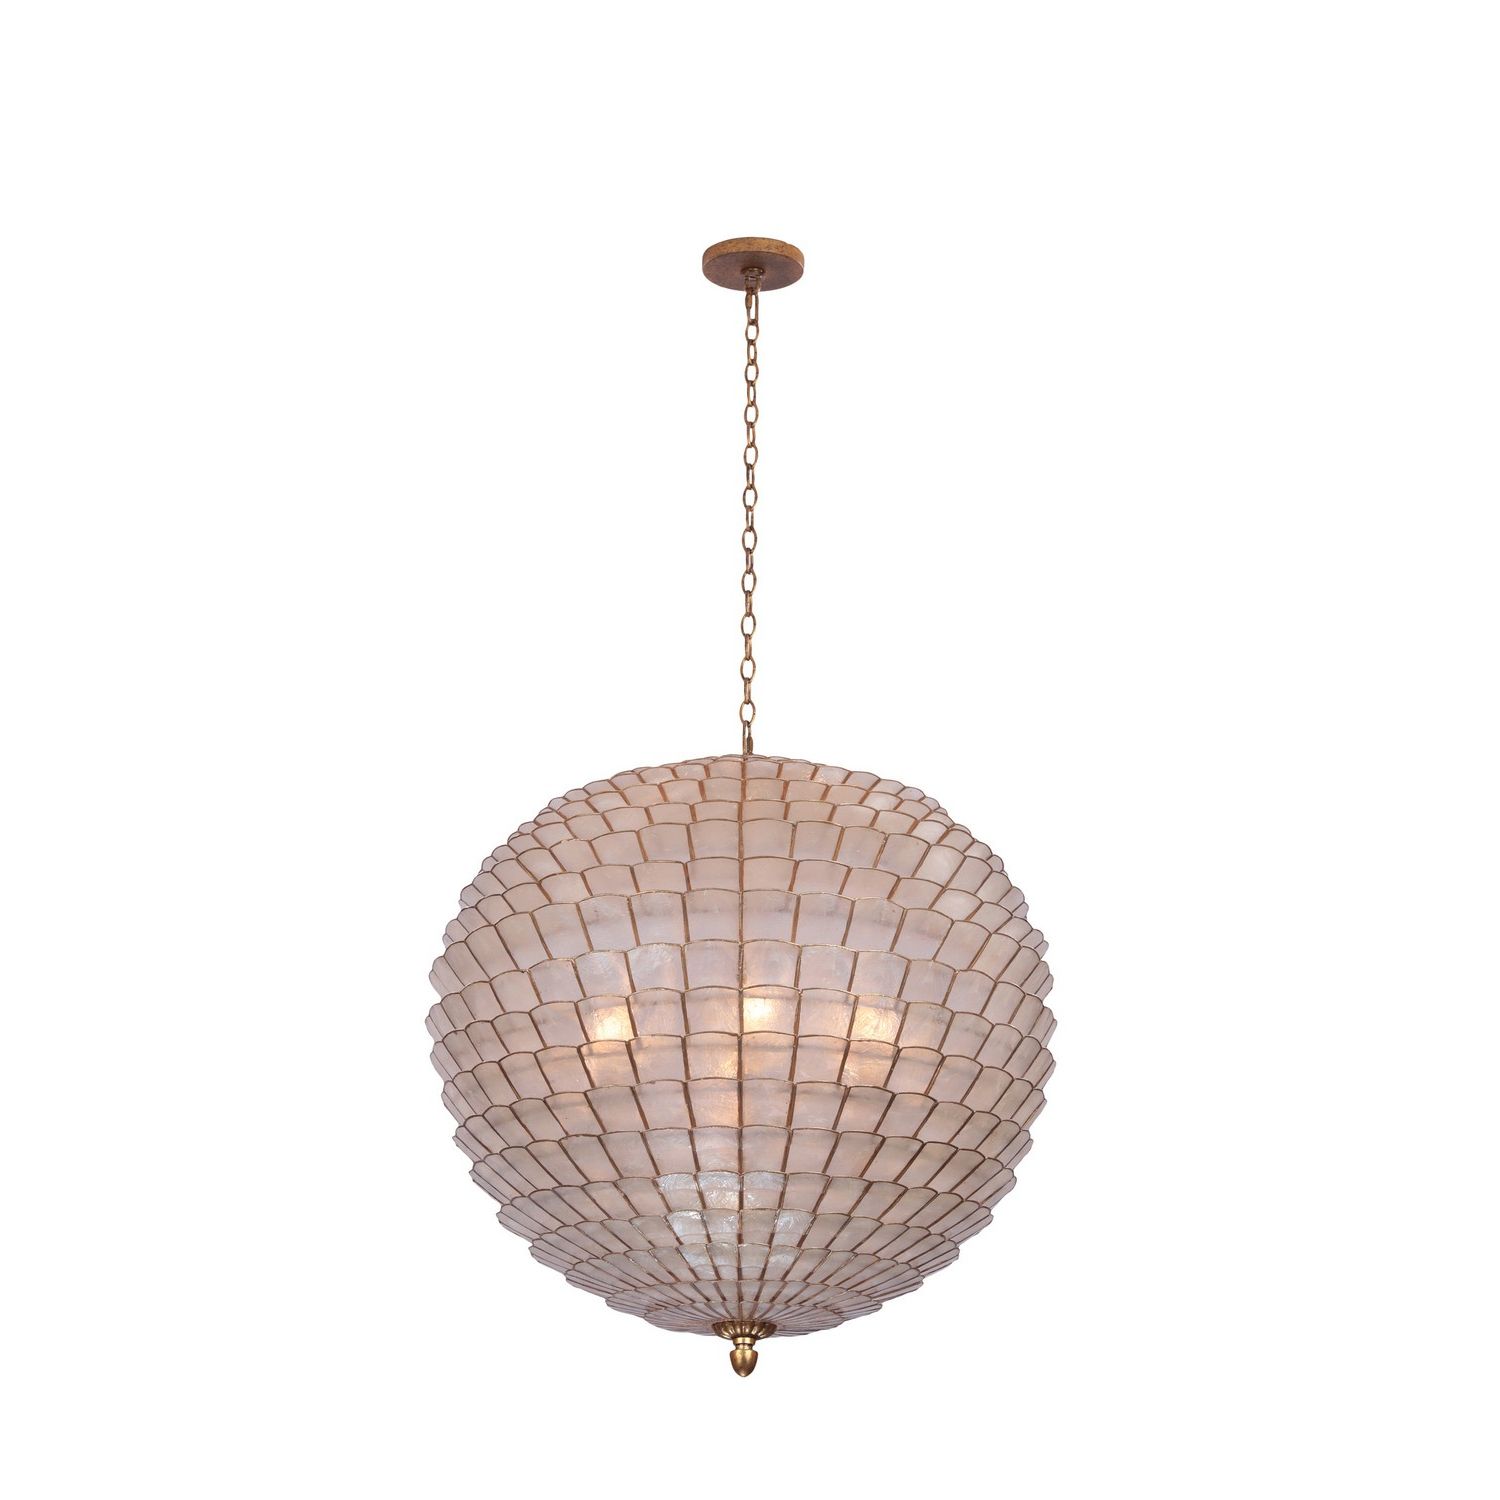 Kalco Pertaining To 25 Inch Lantern Chandeliers (View 7 of 10)